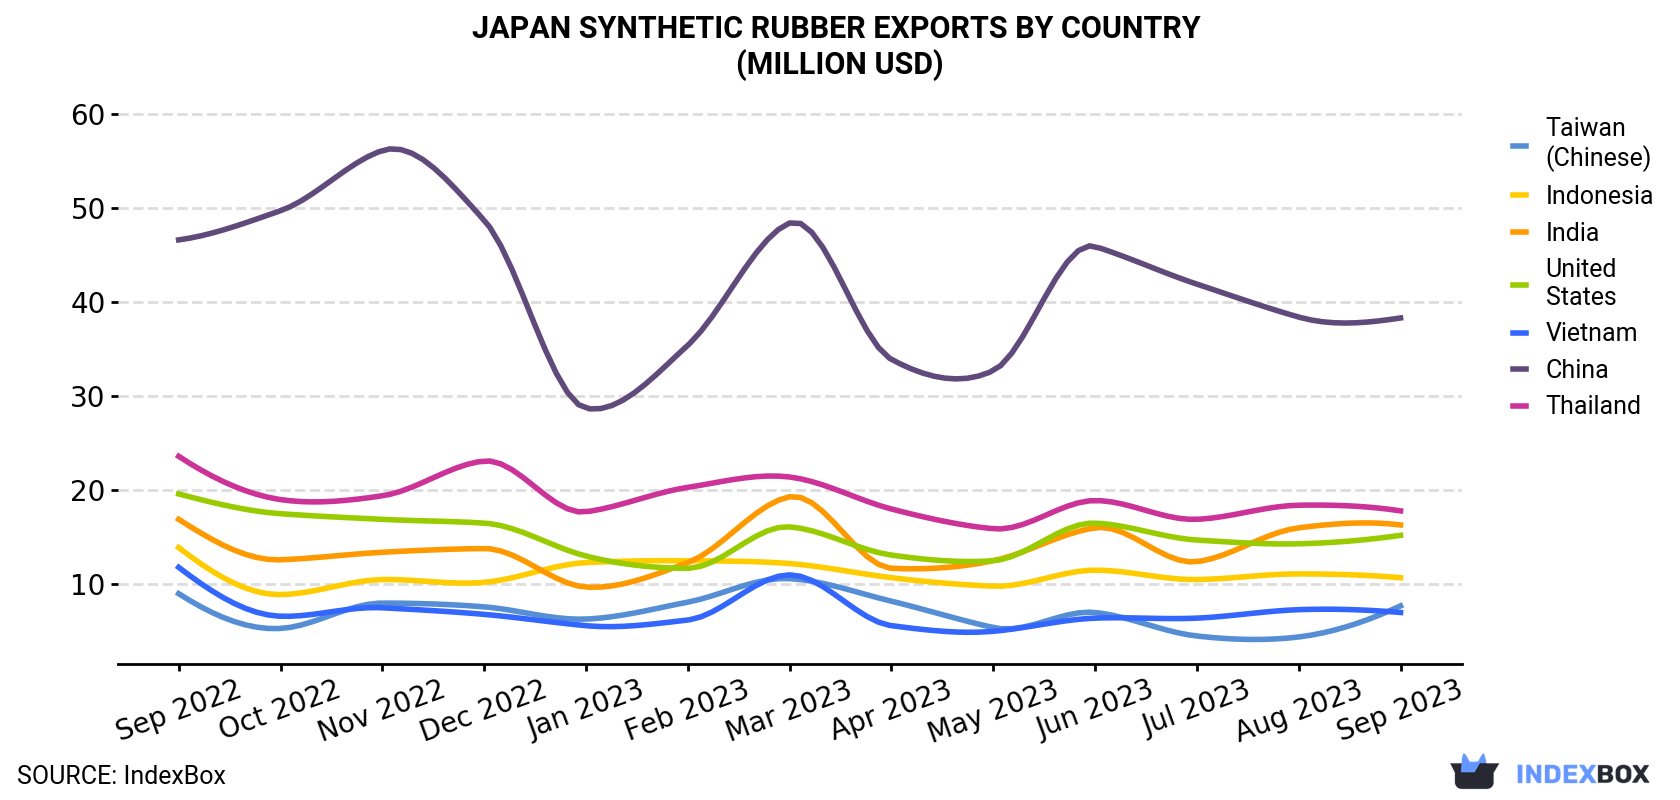 Japan Synthetic Rubber Exports By Country (Million USD)